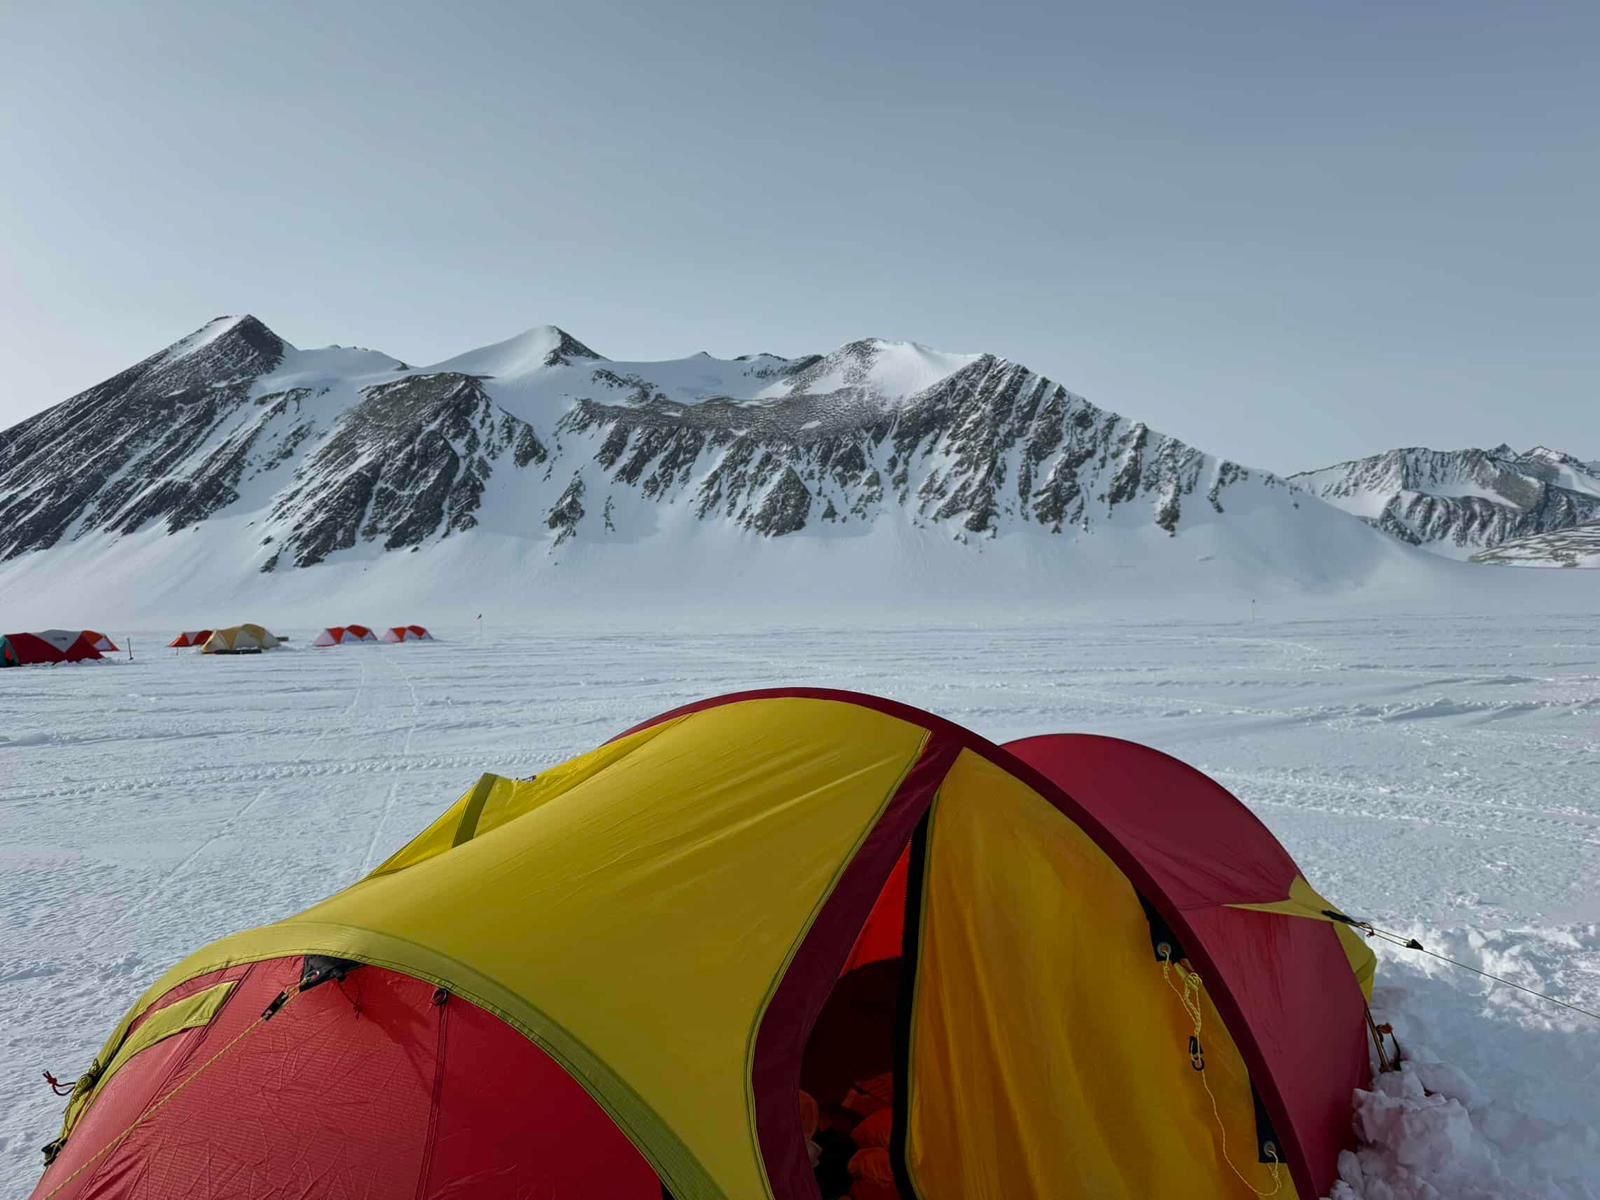 Mr Cox’s tent pitched in Antarctica after he arrived there this week (Sam Cox/PA)